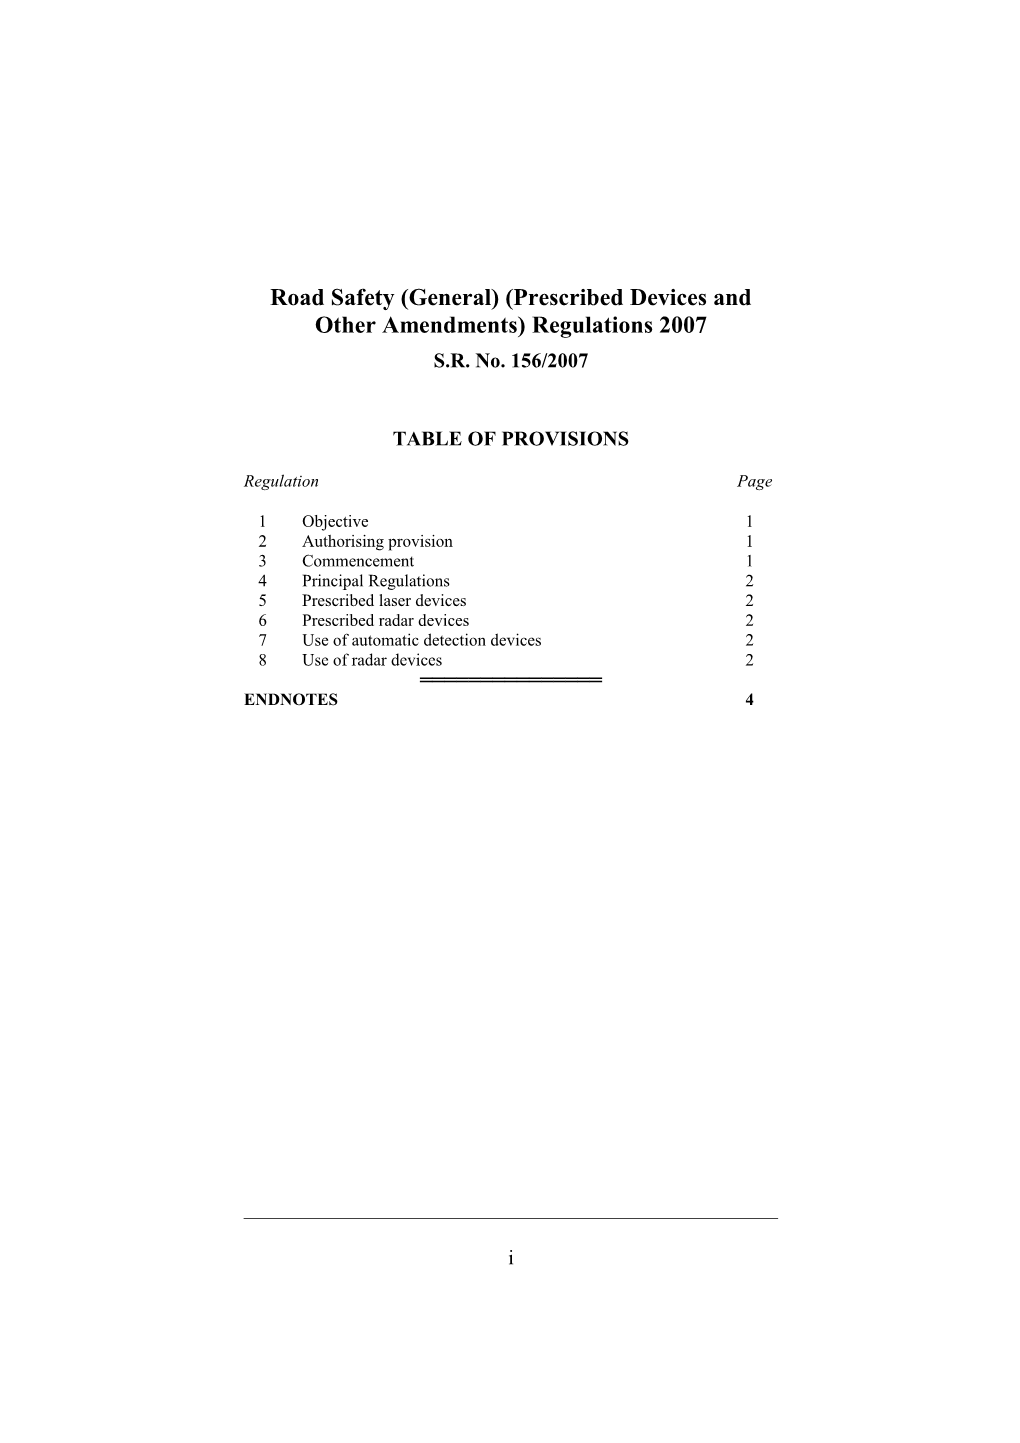 Road Safety (General) (Prescribed Devices and Other Amendments) Regulations 2007